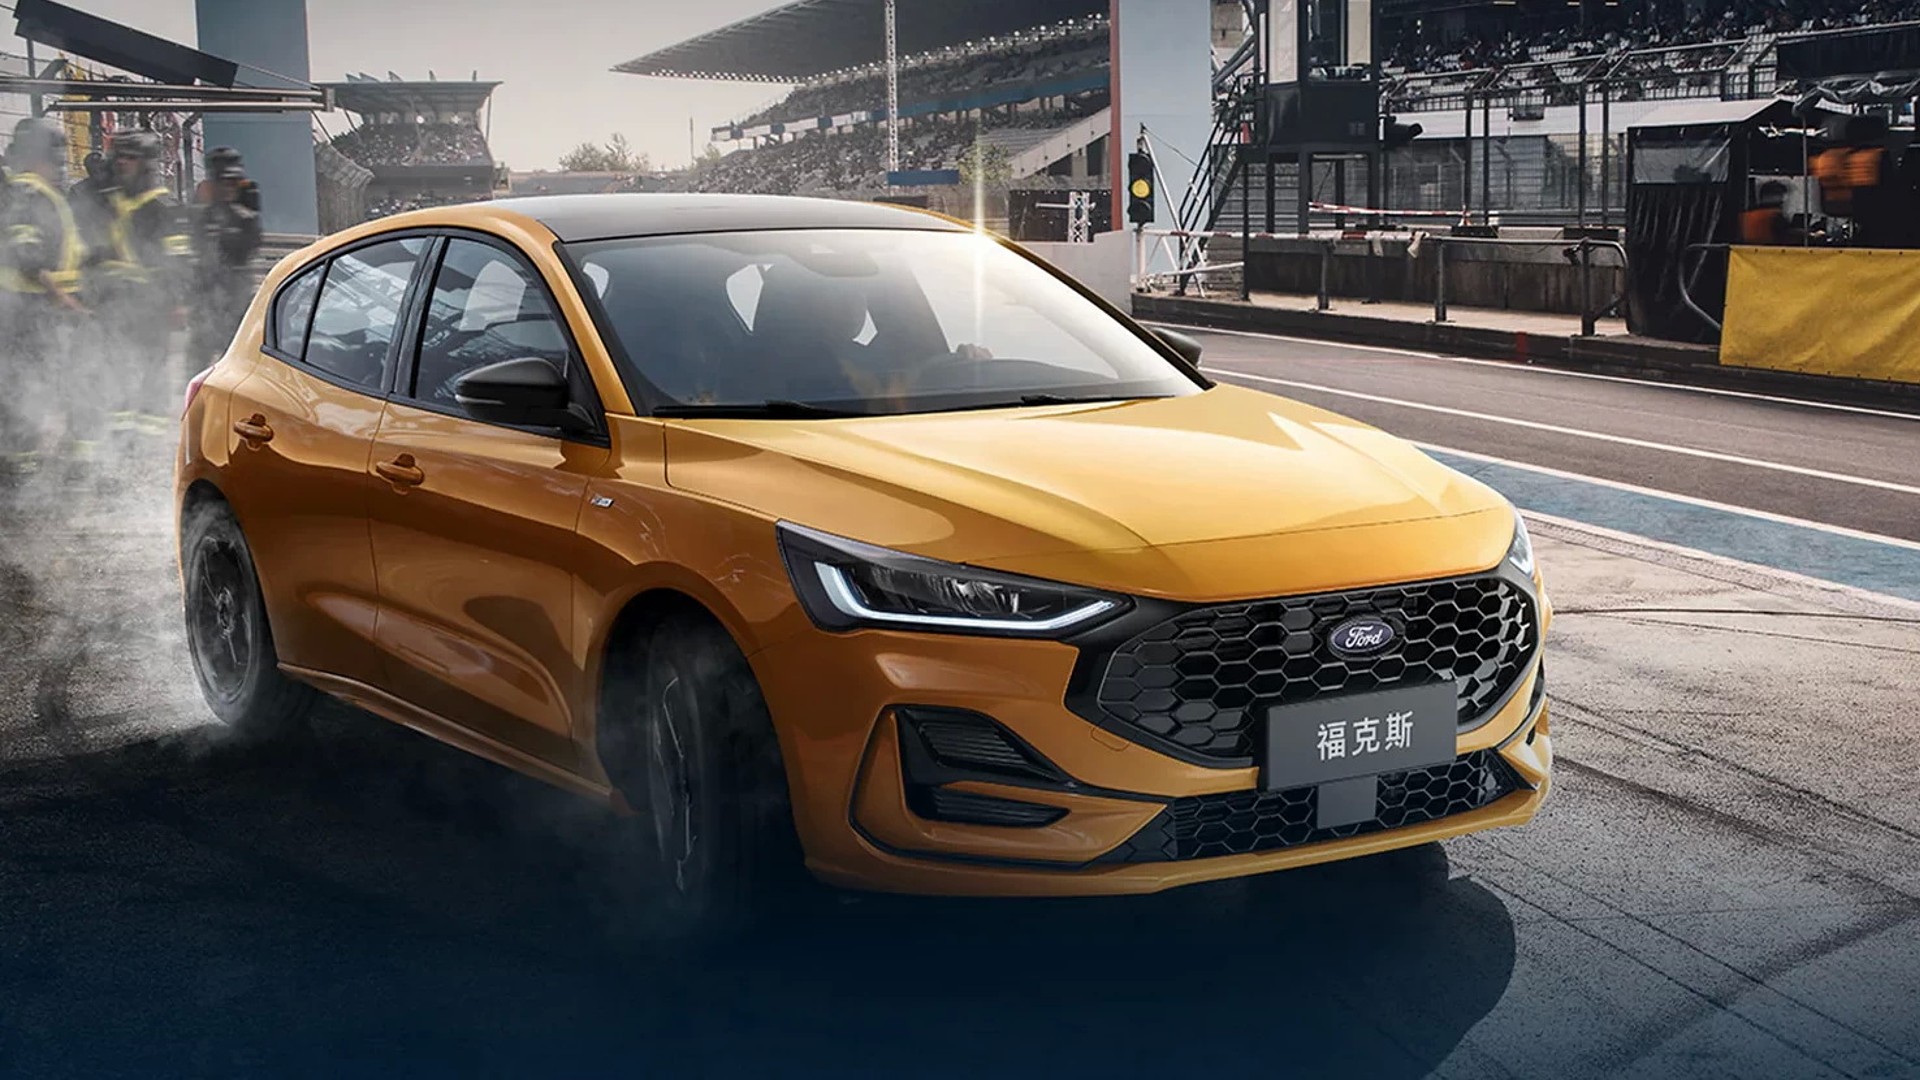 New 2023 Ford Focus is launched with a sportier look